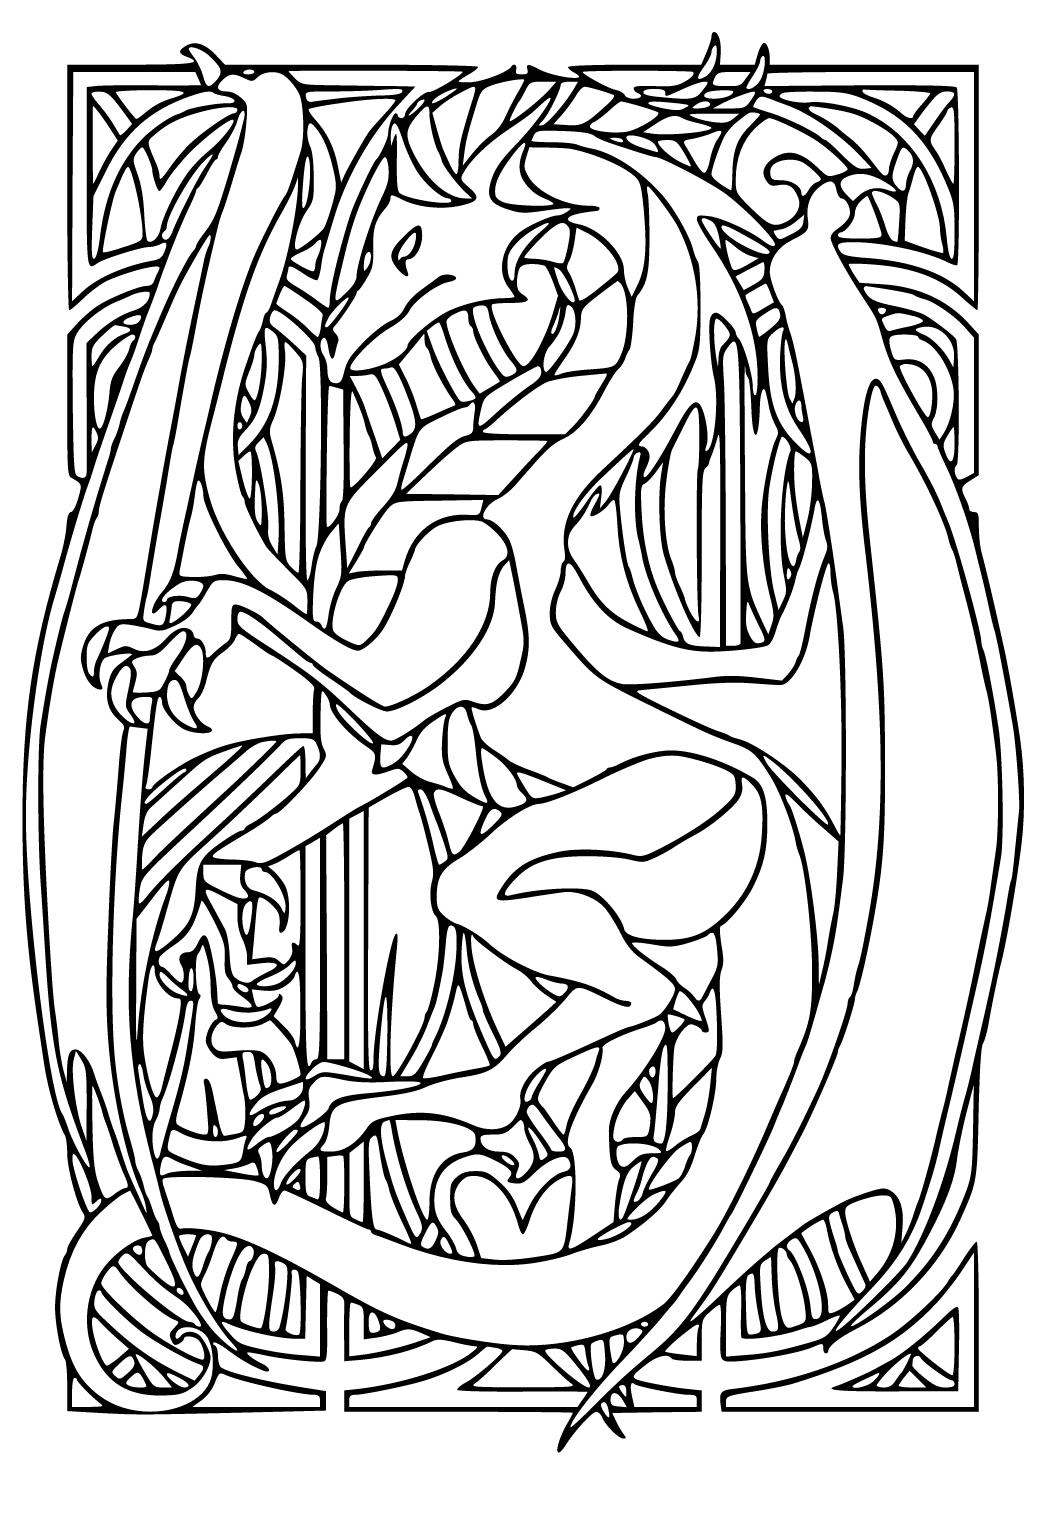 Free printable stained glass dragon coloring page sheet and picture for adults and kids girls and boys